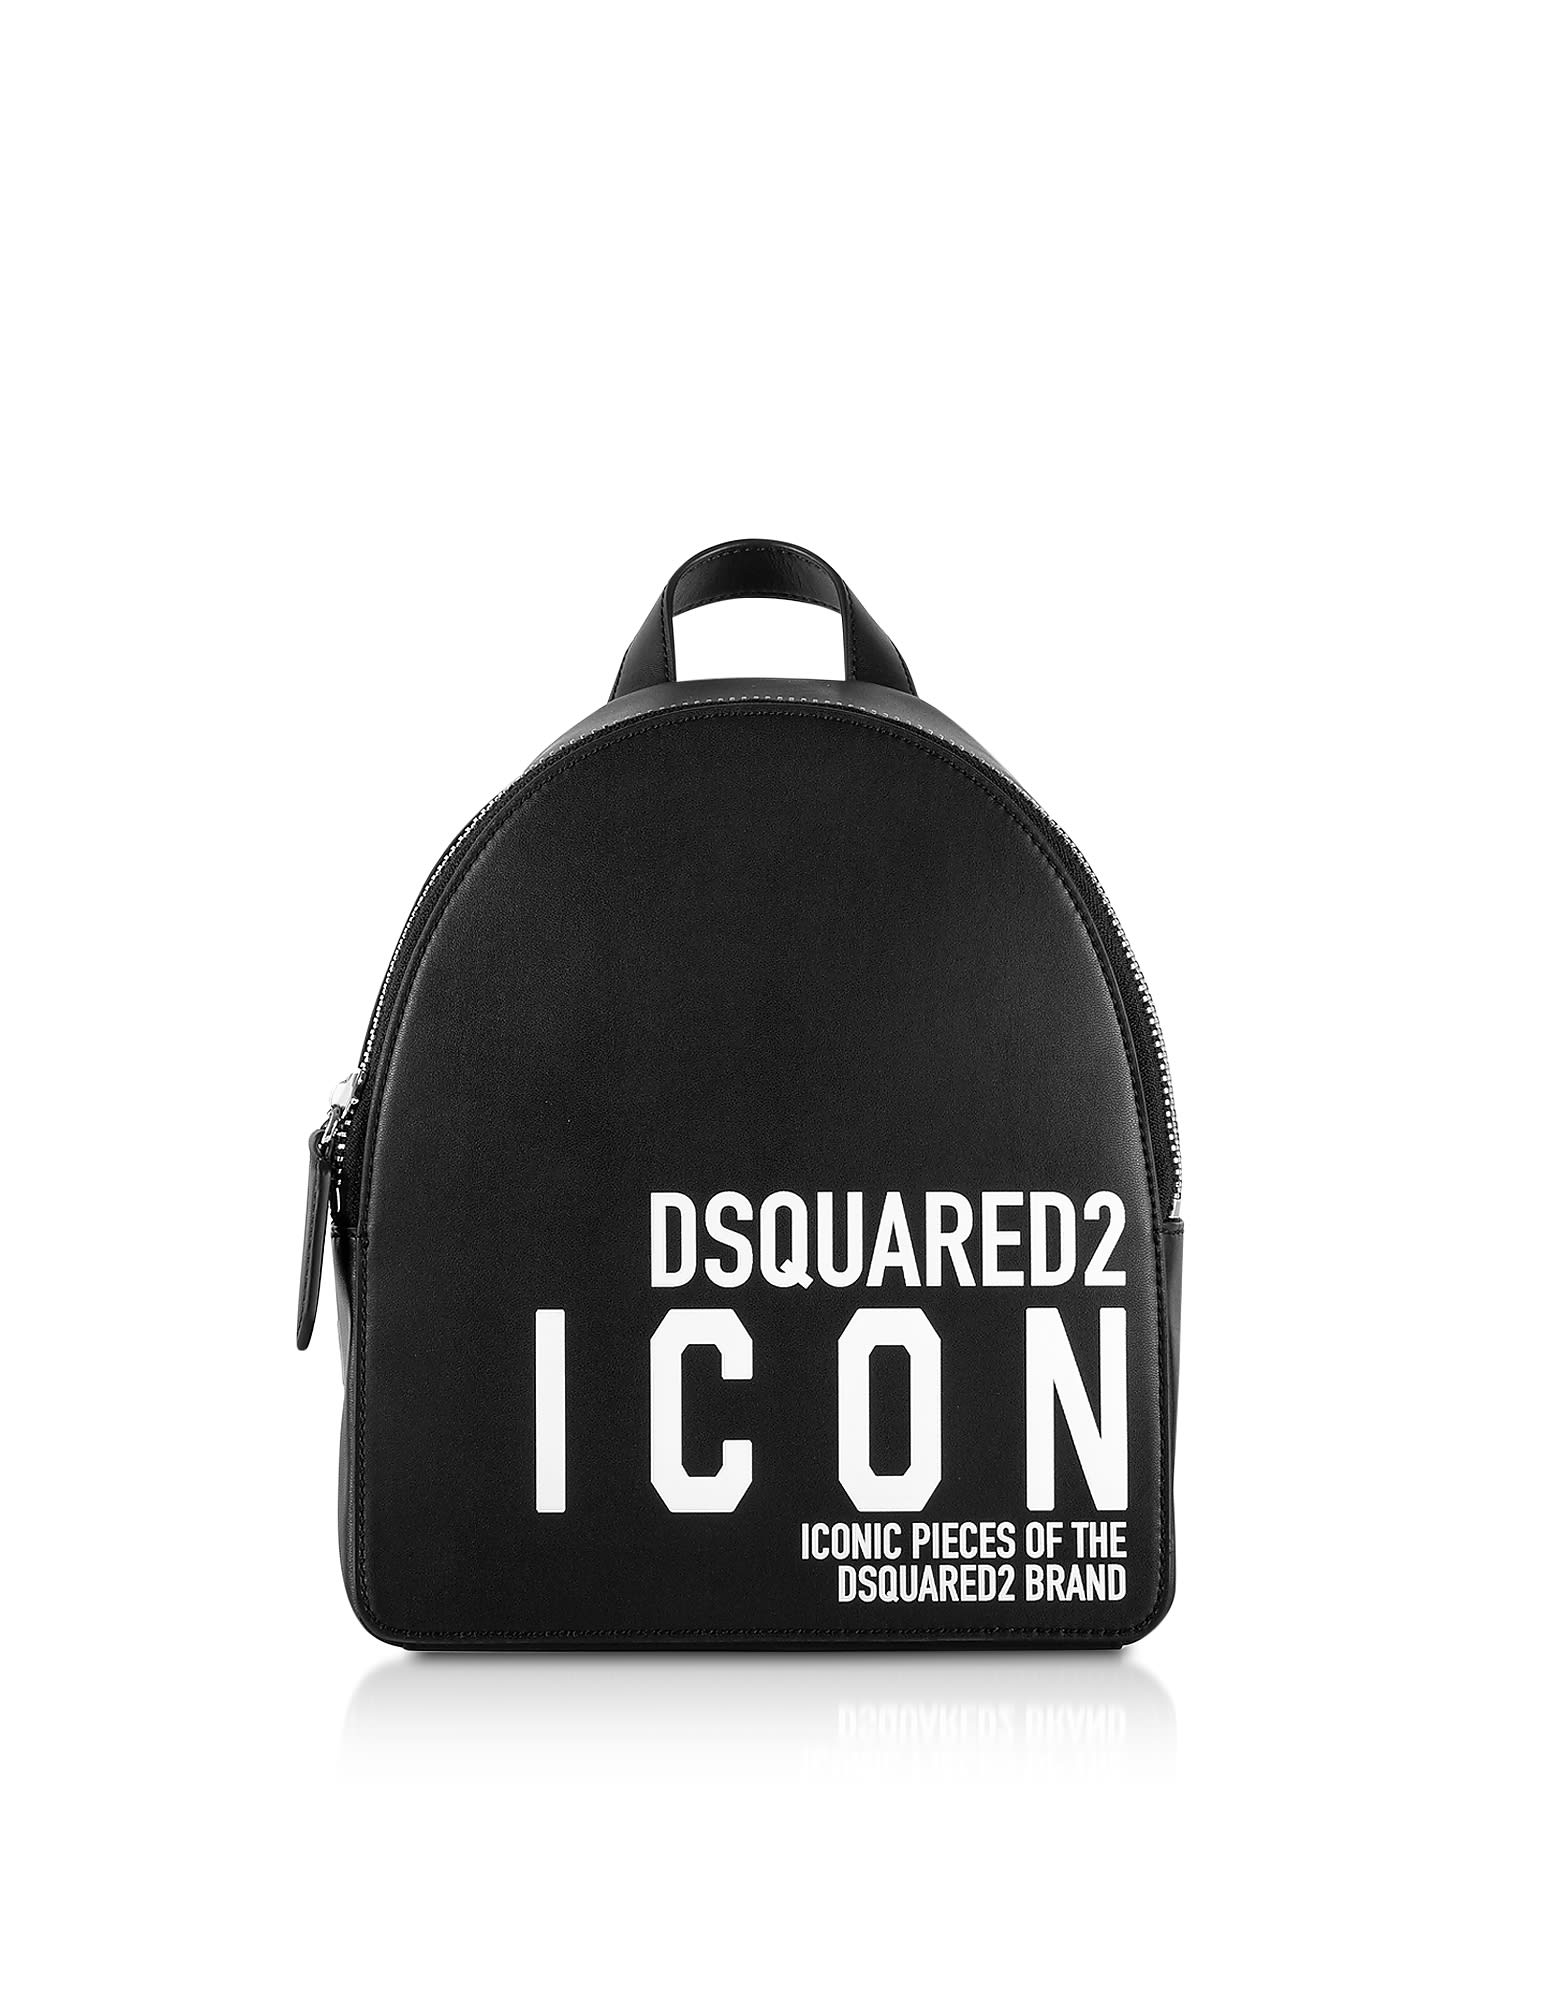 DSQUARED2 NEW ICON BLACK CALF LEATHER BACKPACK,11249915